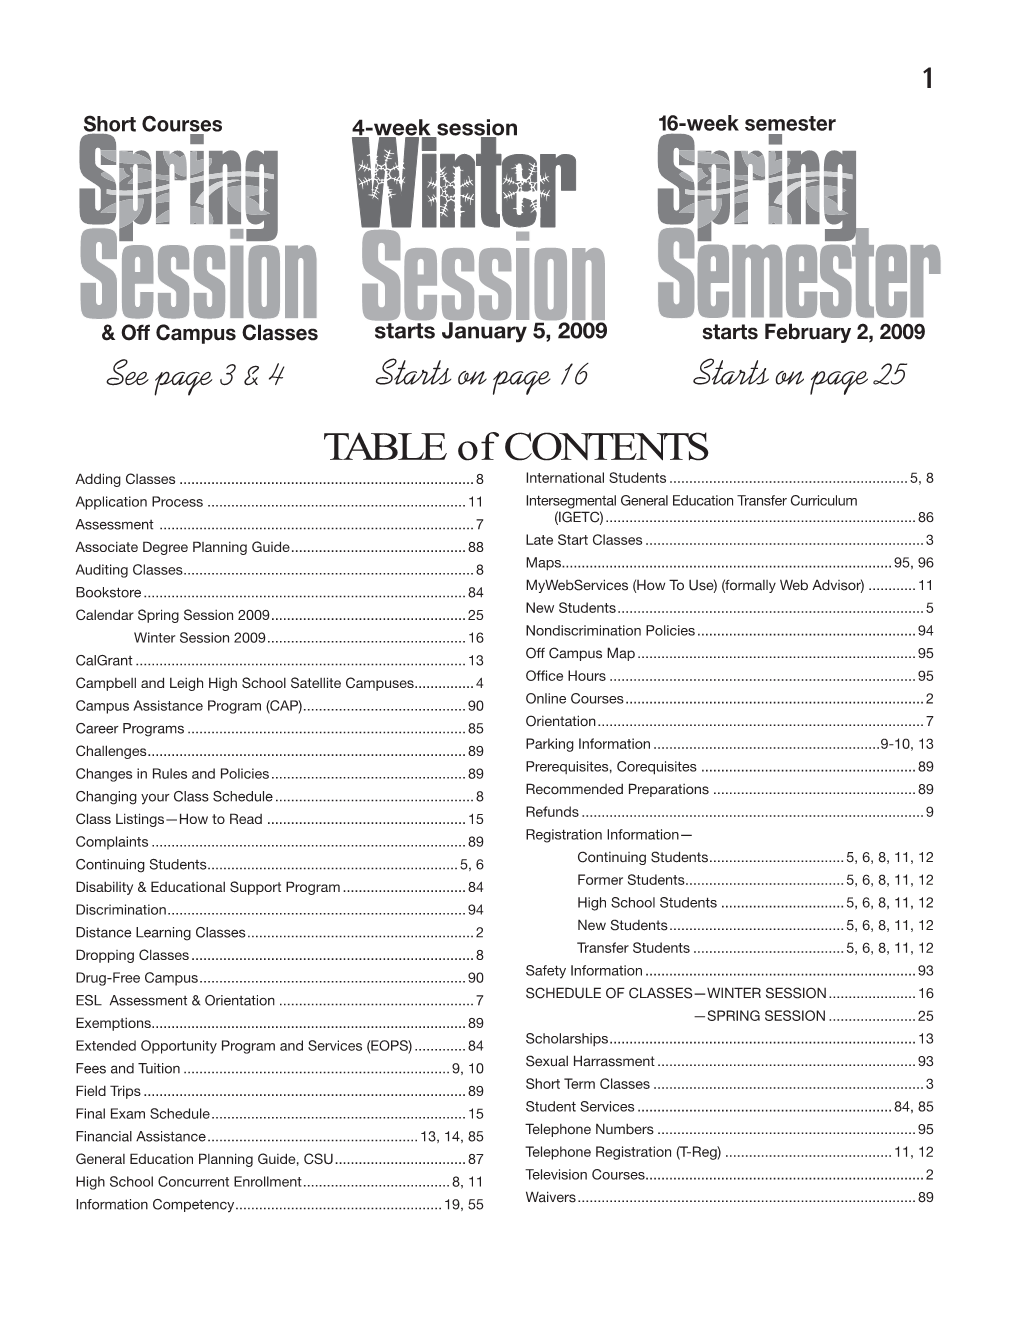 TABLE of CONTENTS Adding Classes